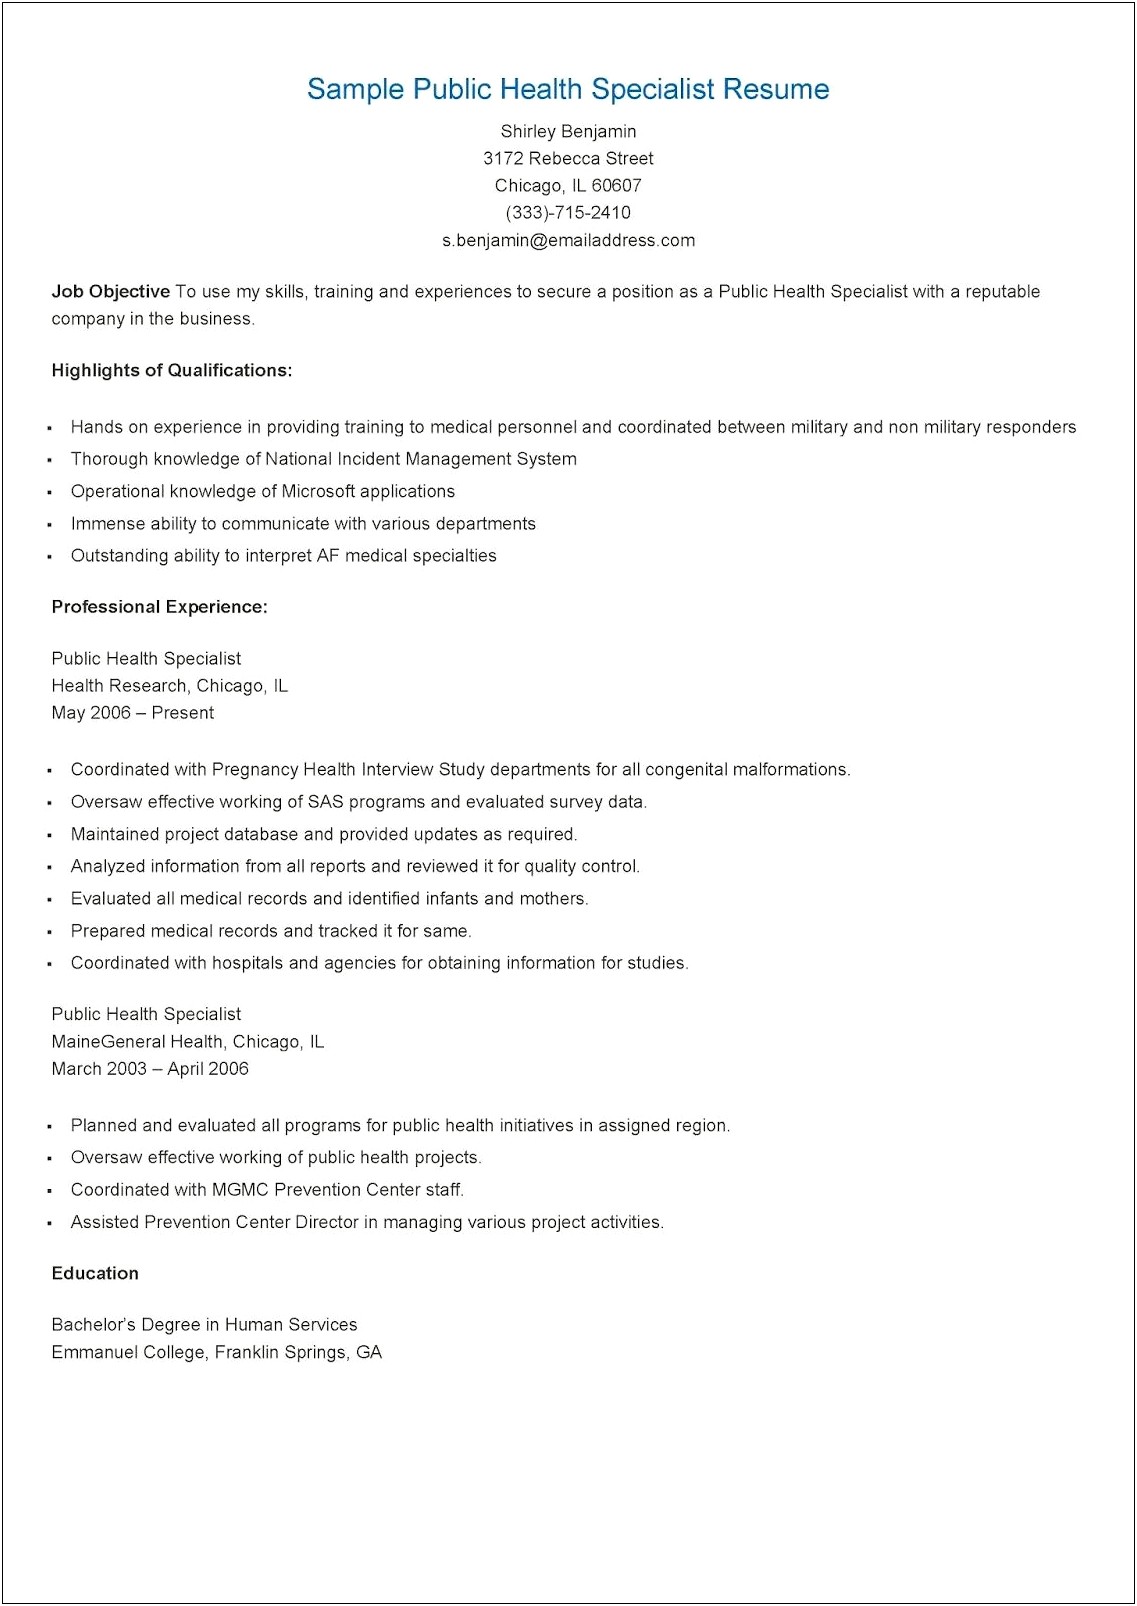 Health System Specialist Resume Example